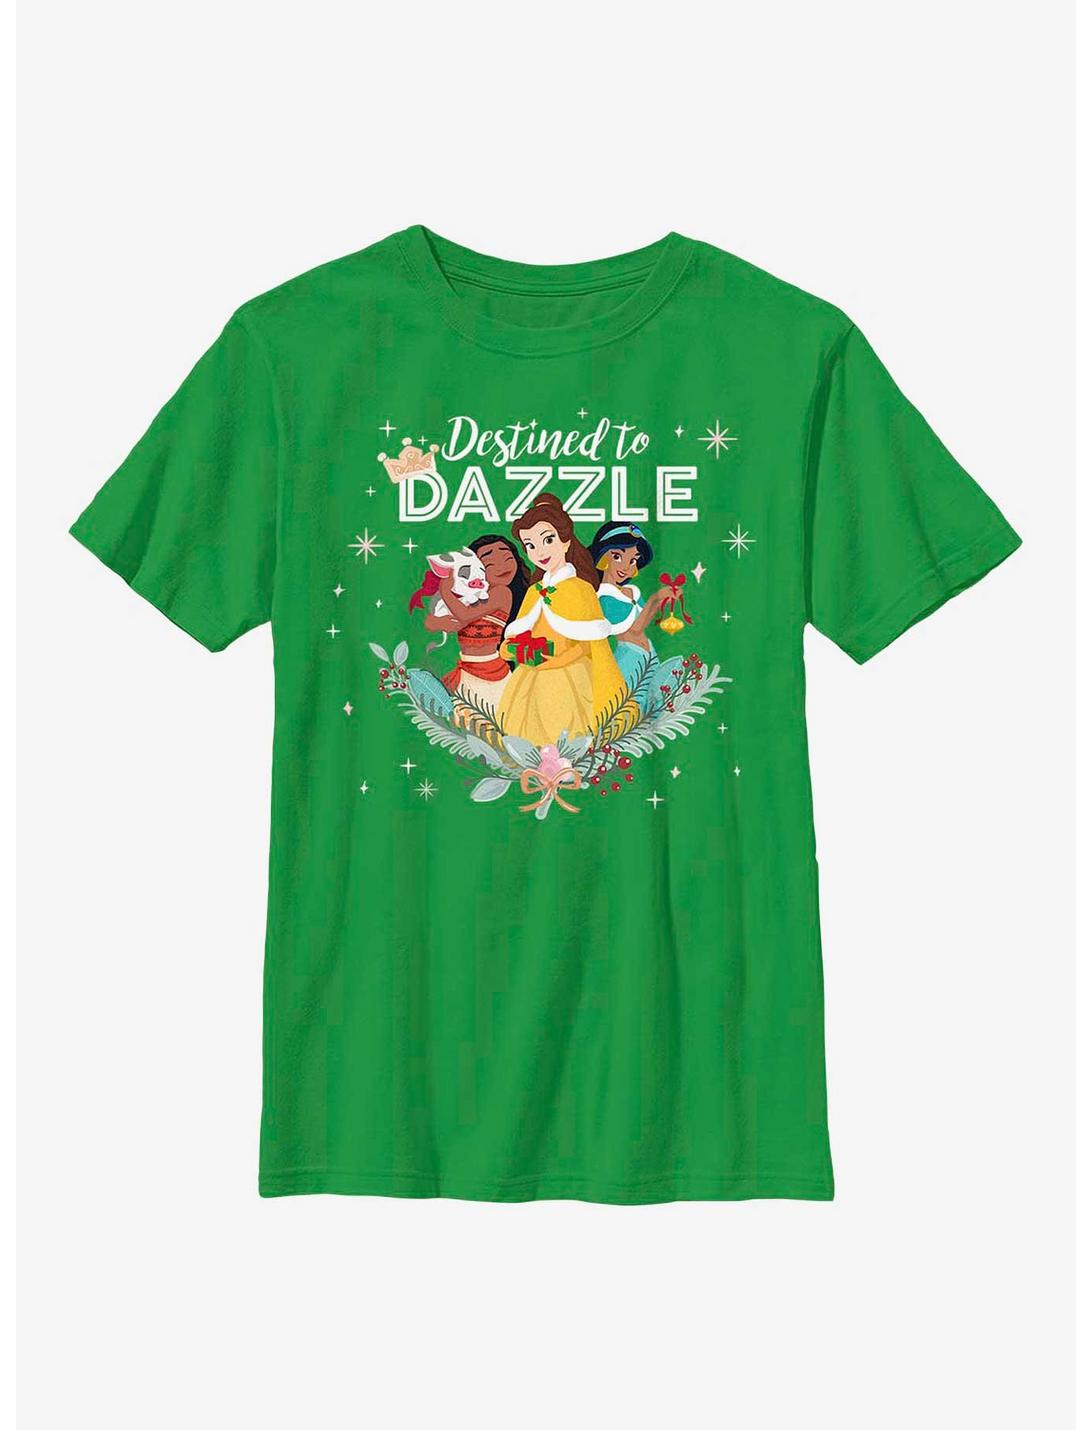 Disney Princesses Destined To Dazzle Youth T-Shirt, KELLY, hi-res